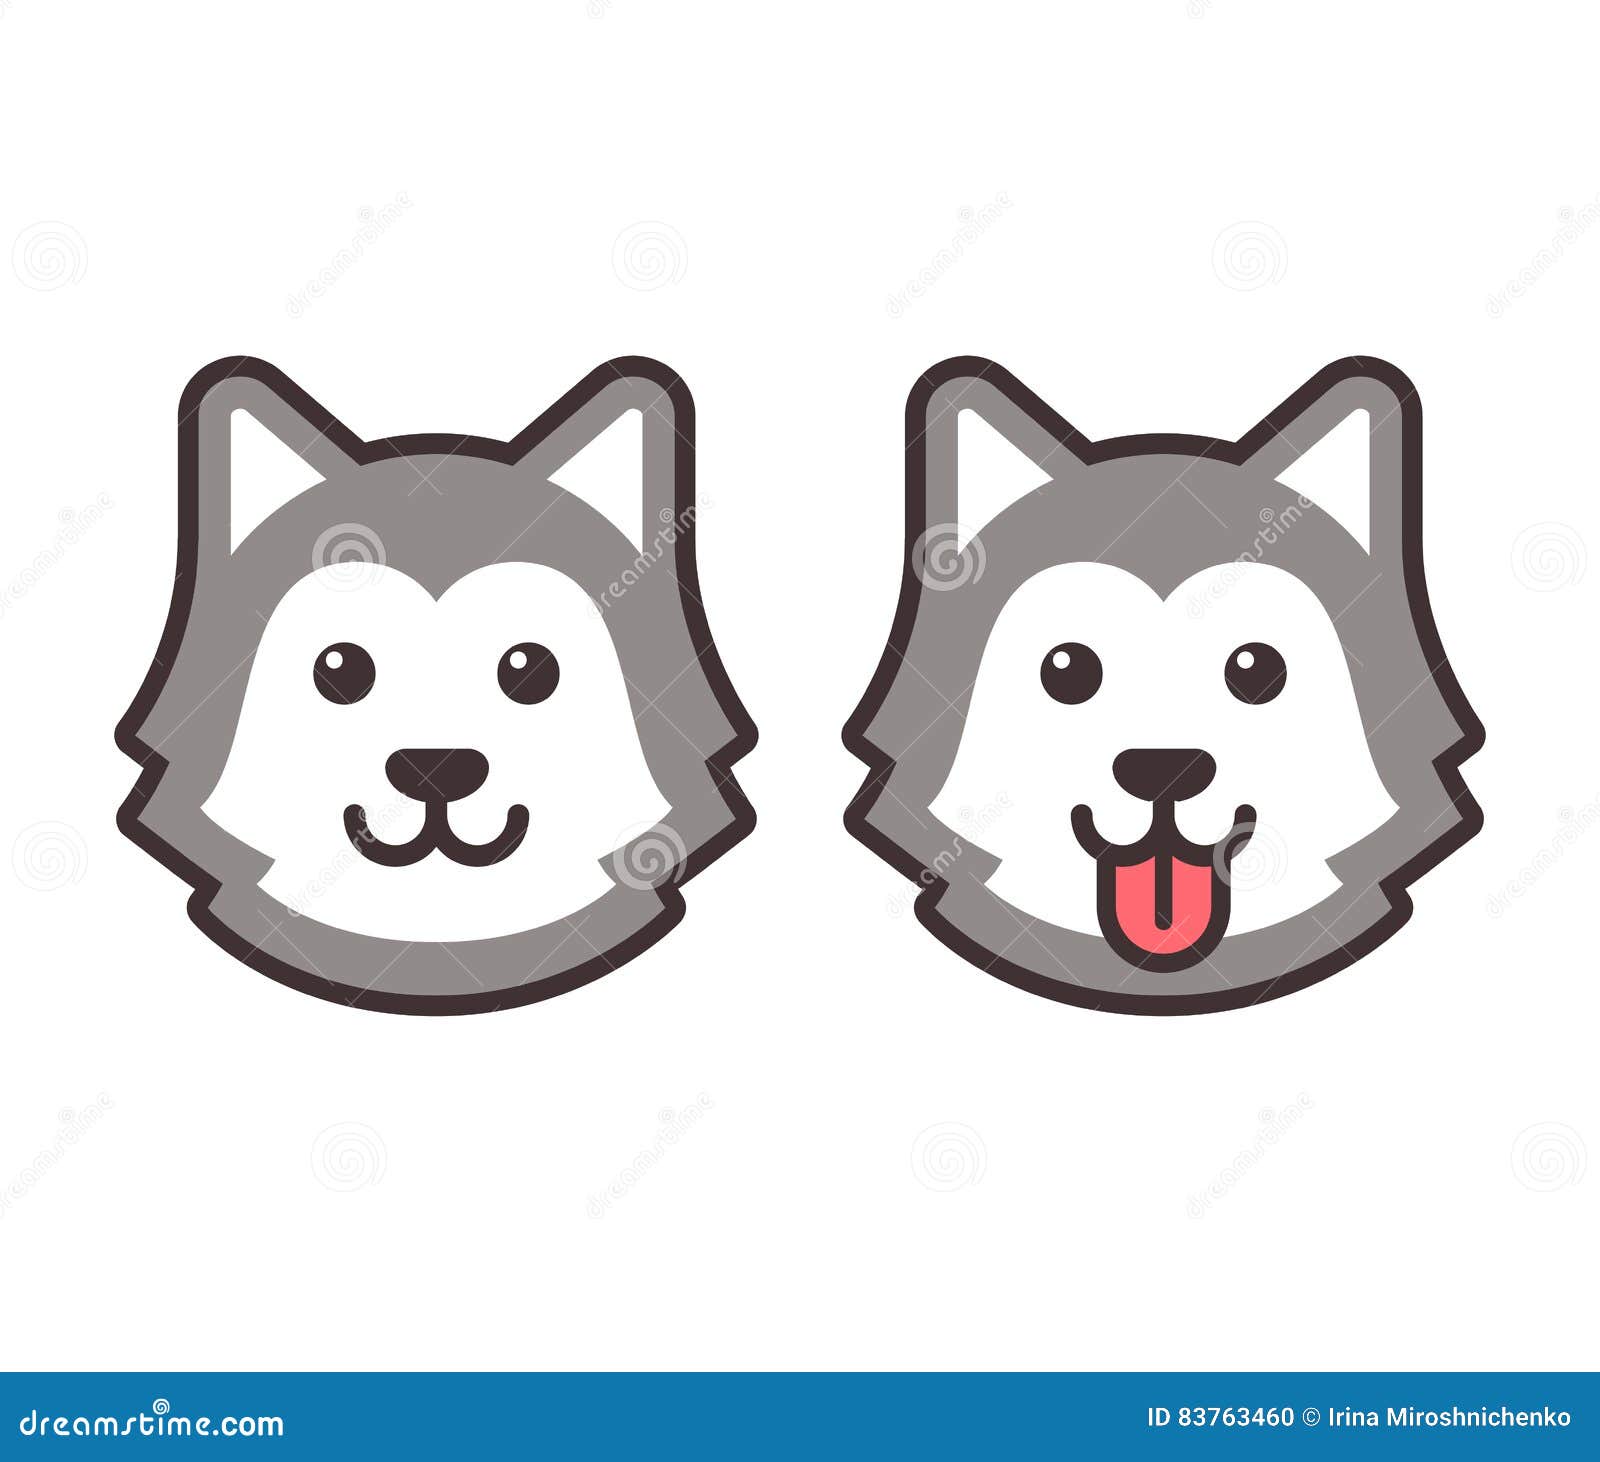 Husky head icons stock vector. Illustration of cute, north ...